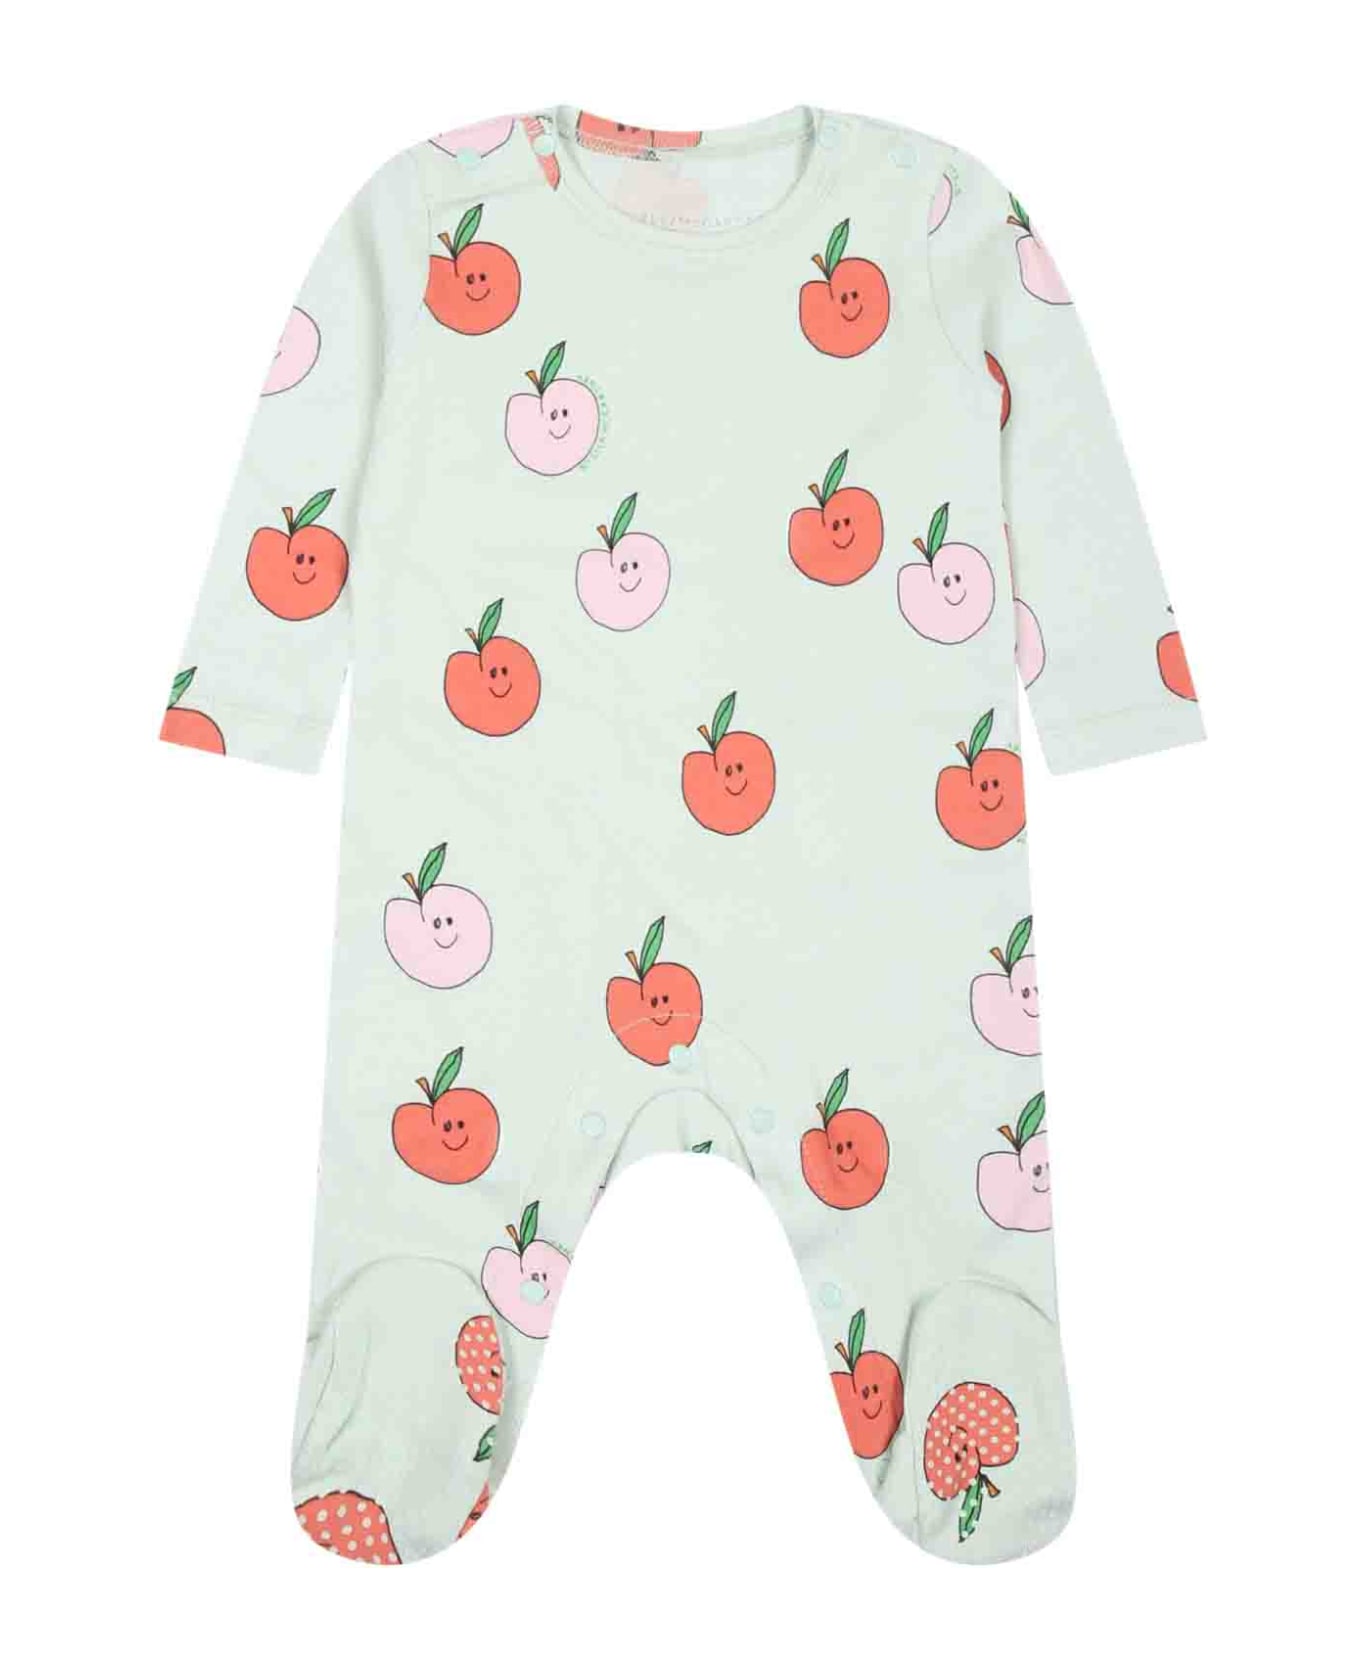 Stella McCartney Kids Multicolor Set For Baby Girl With Apple - Multicolor